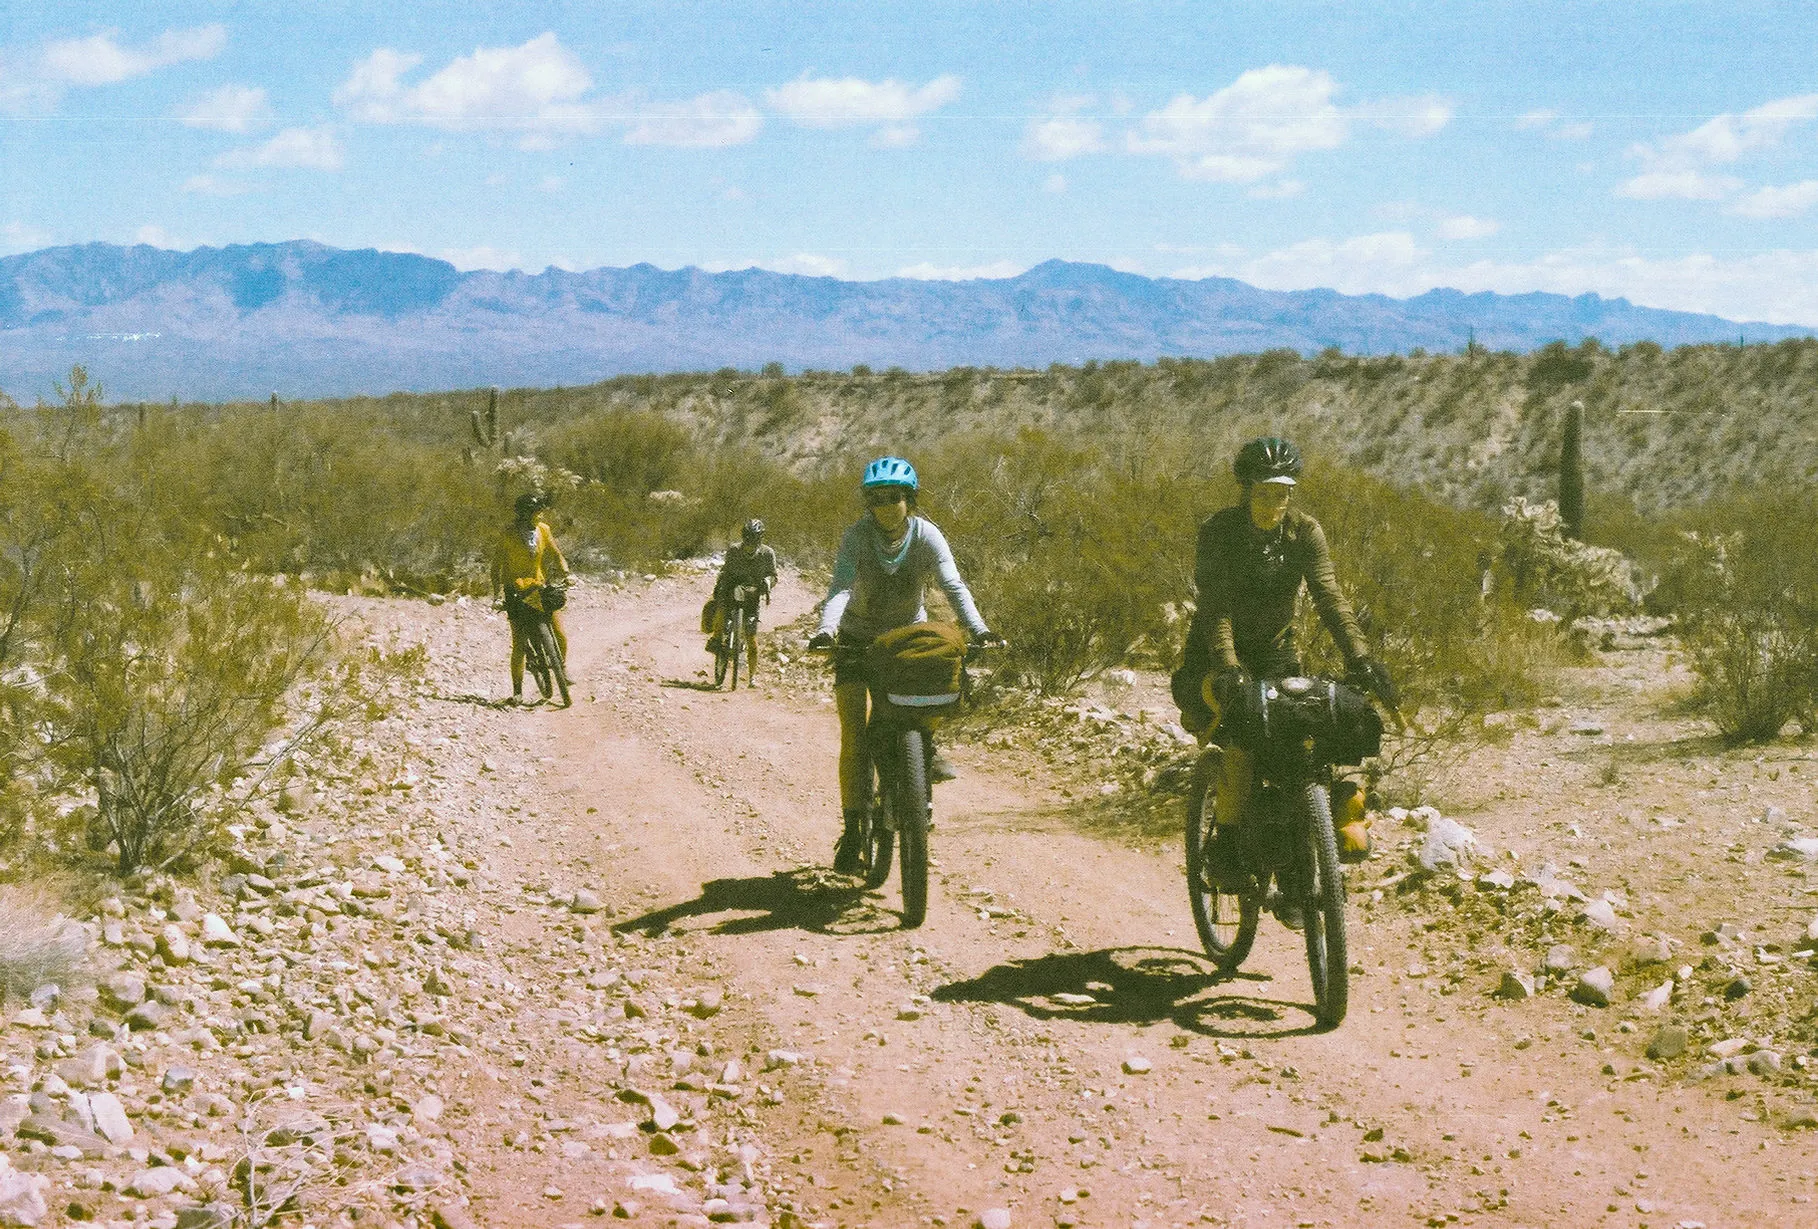 Brenda Croell writes about riding her Otso Cycles Warakin Stainless in the Sonoran Desert.